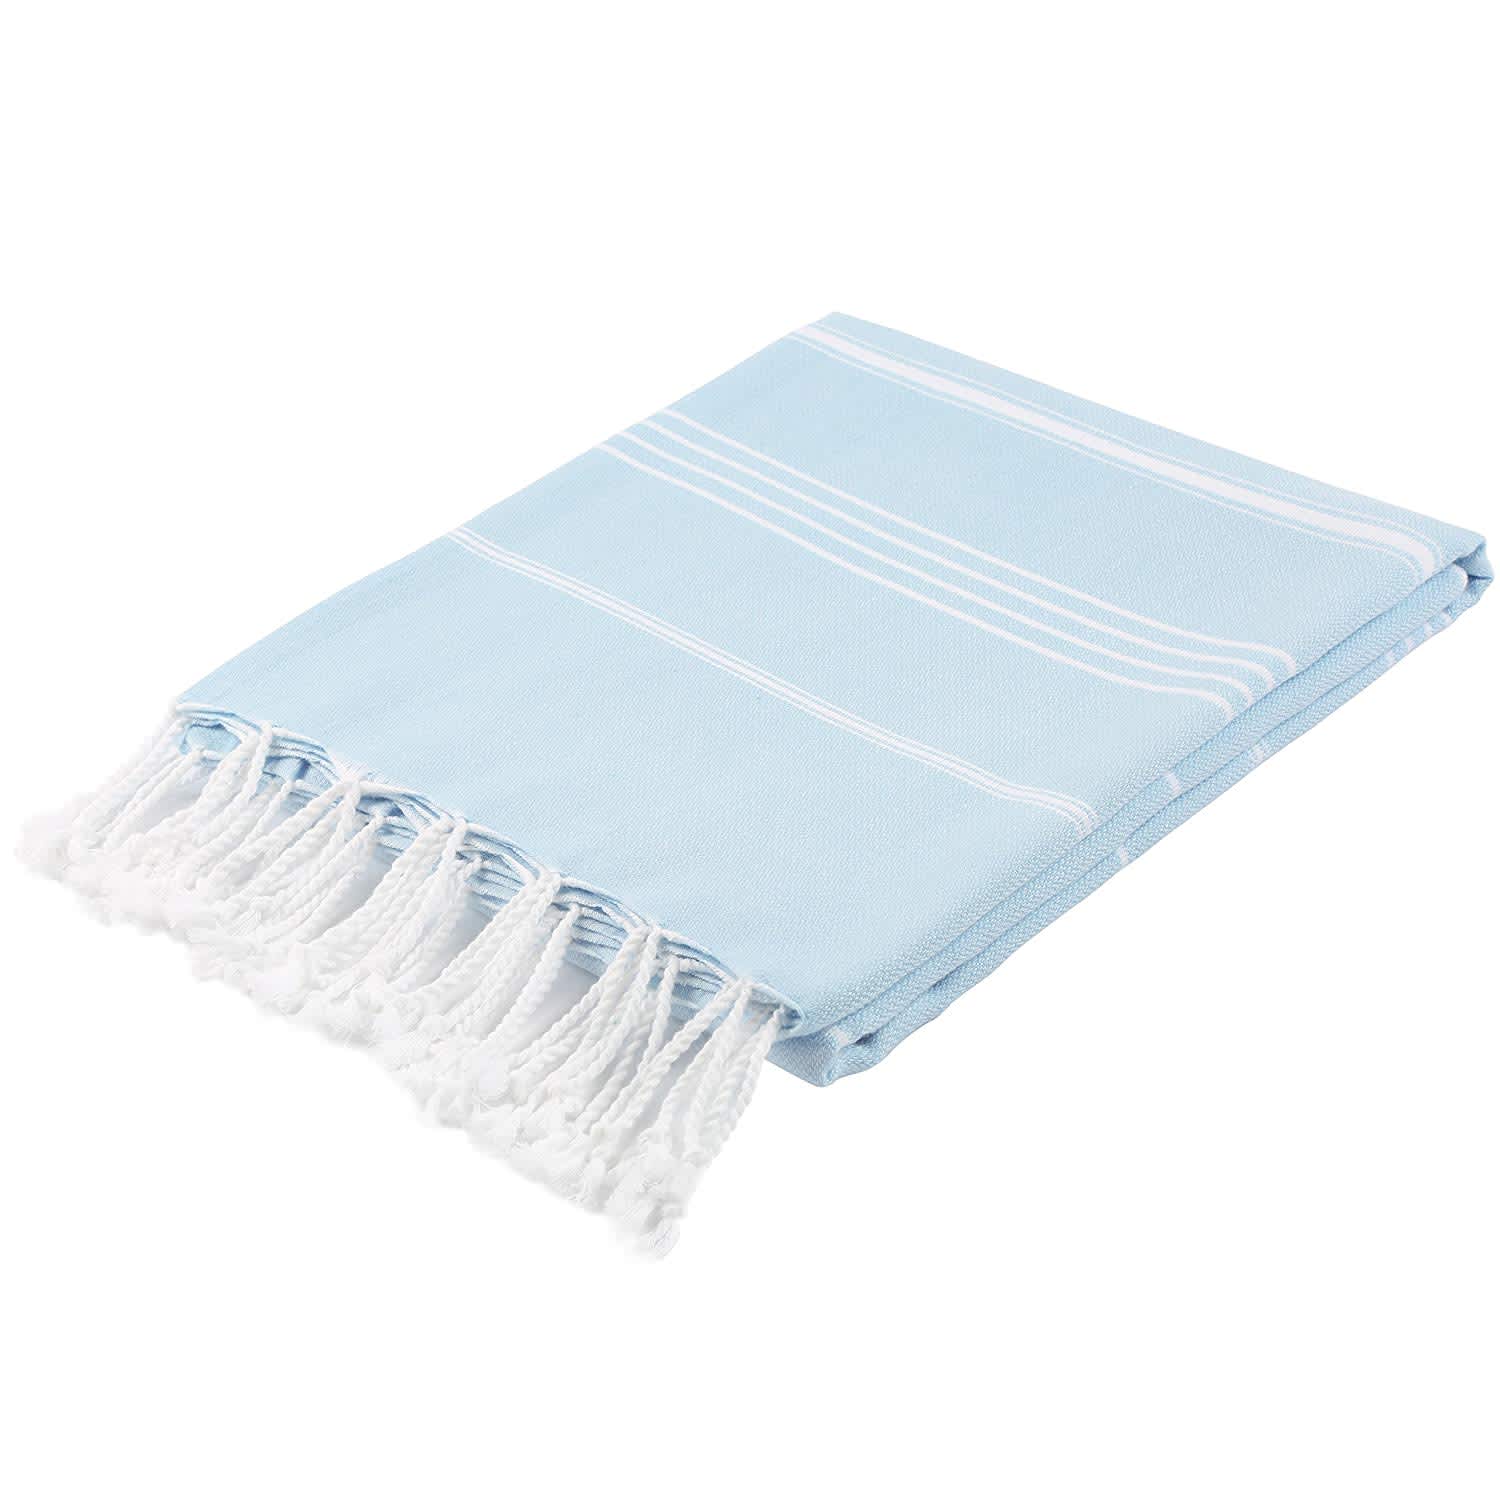 https://cdn.apartmenttherapy.info/image/upload/v1556553696/at/product%20listing/cacala-turkish-towel.jpg